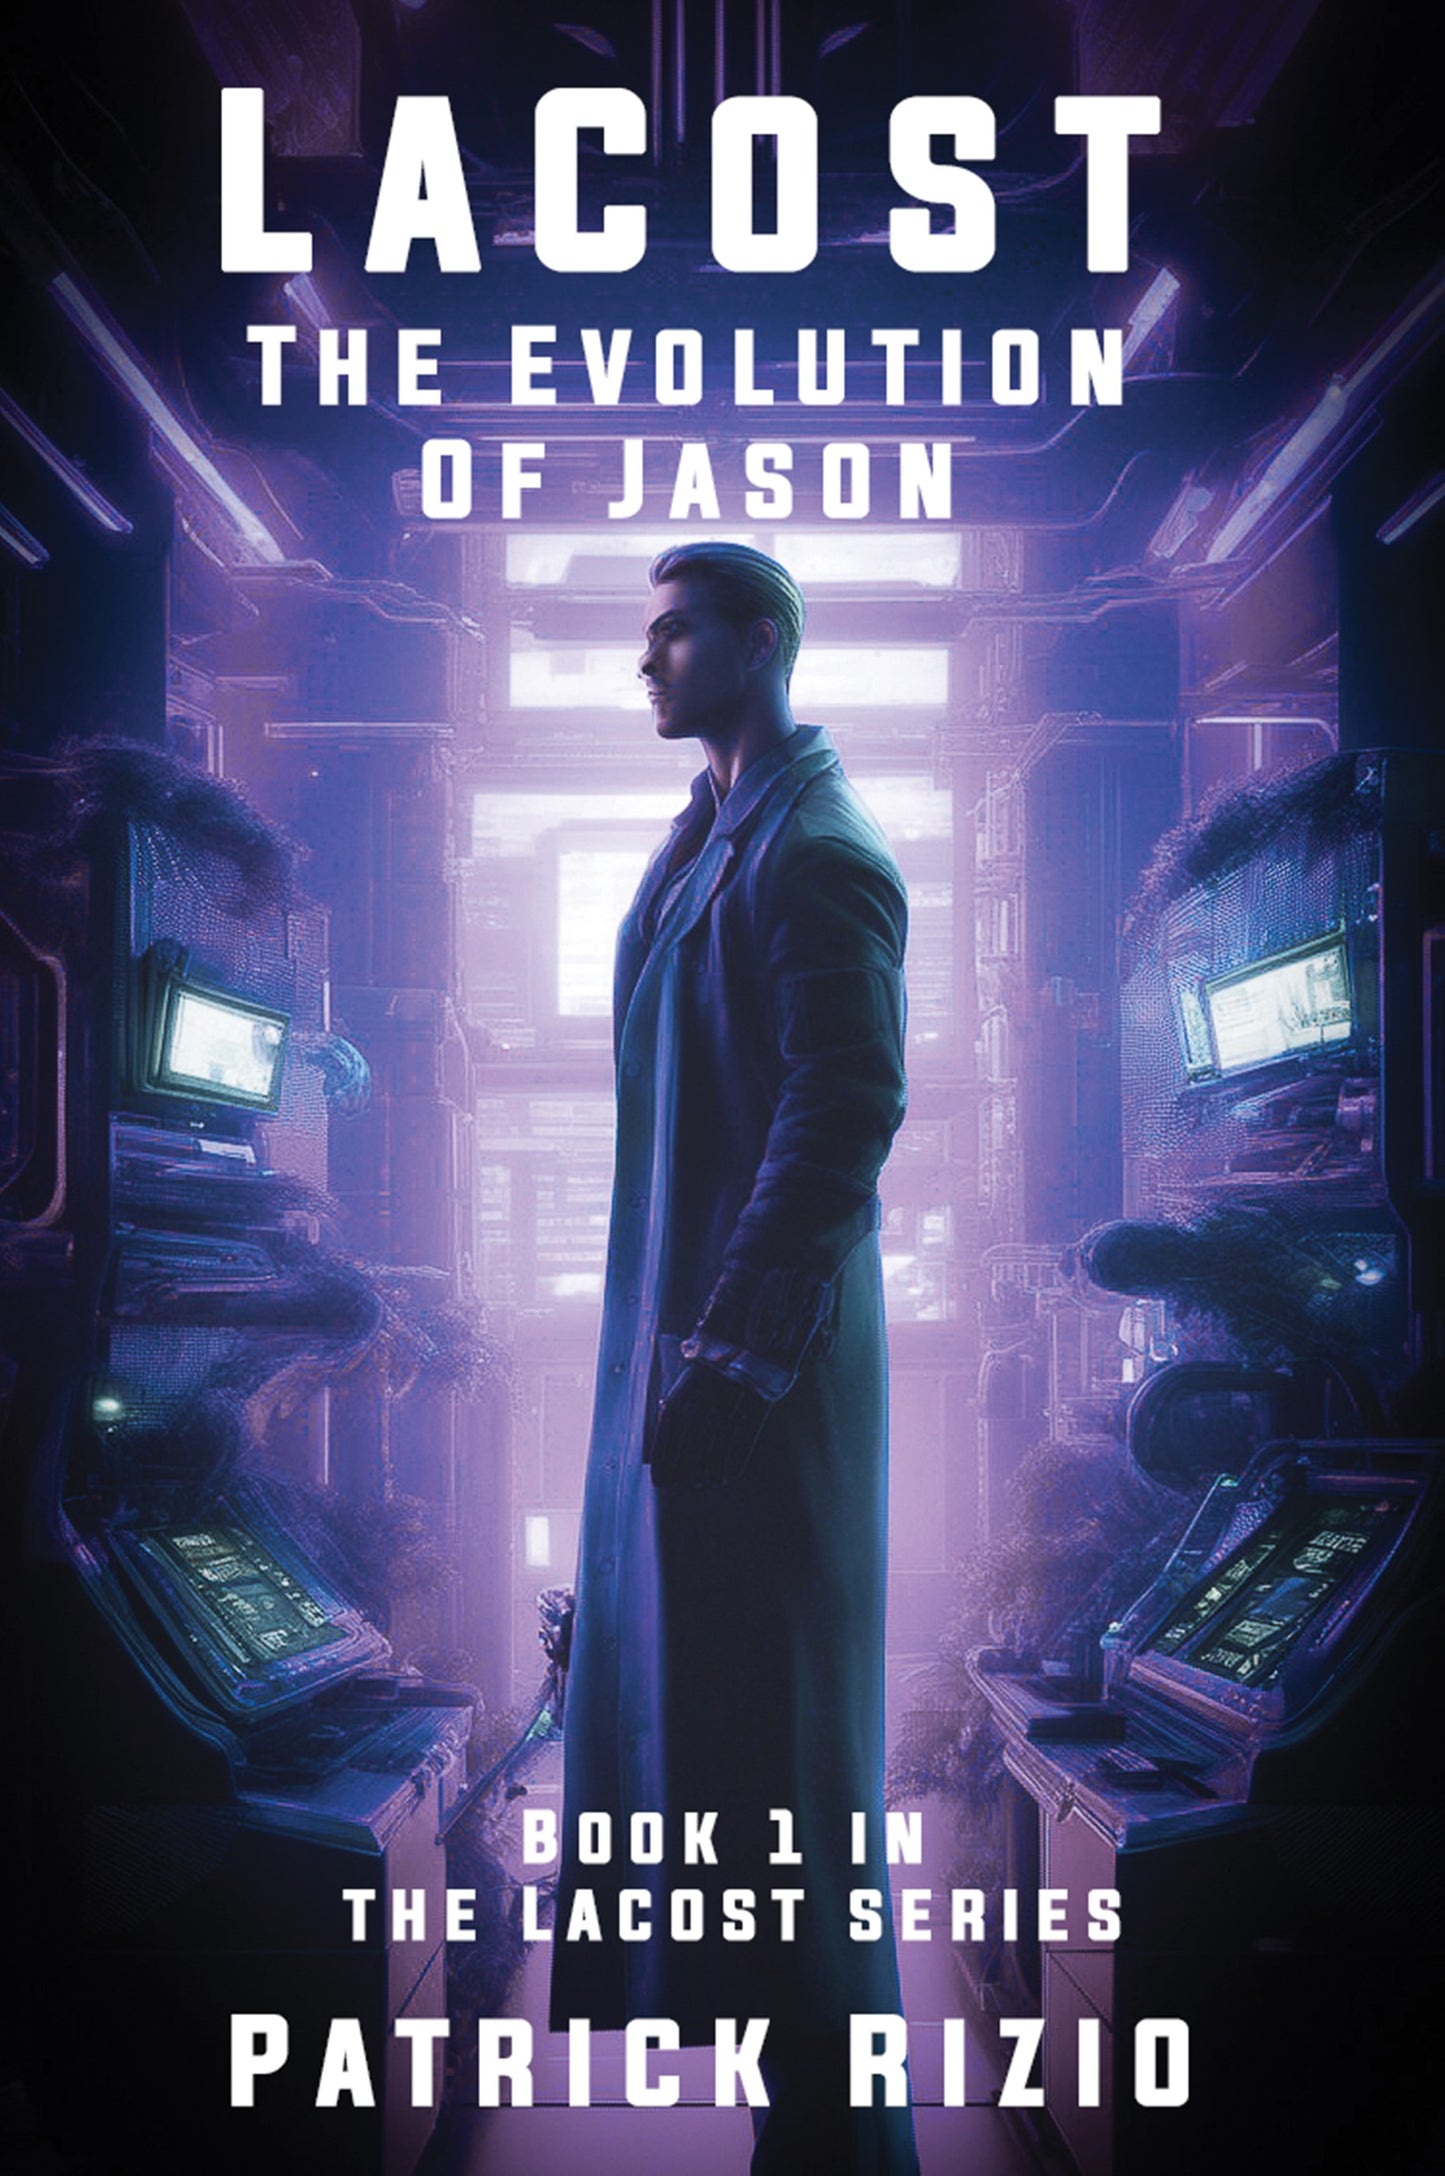 LaCost: The Evolution of Jason — First book in the LaCost Series